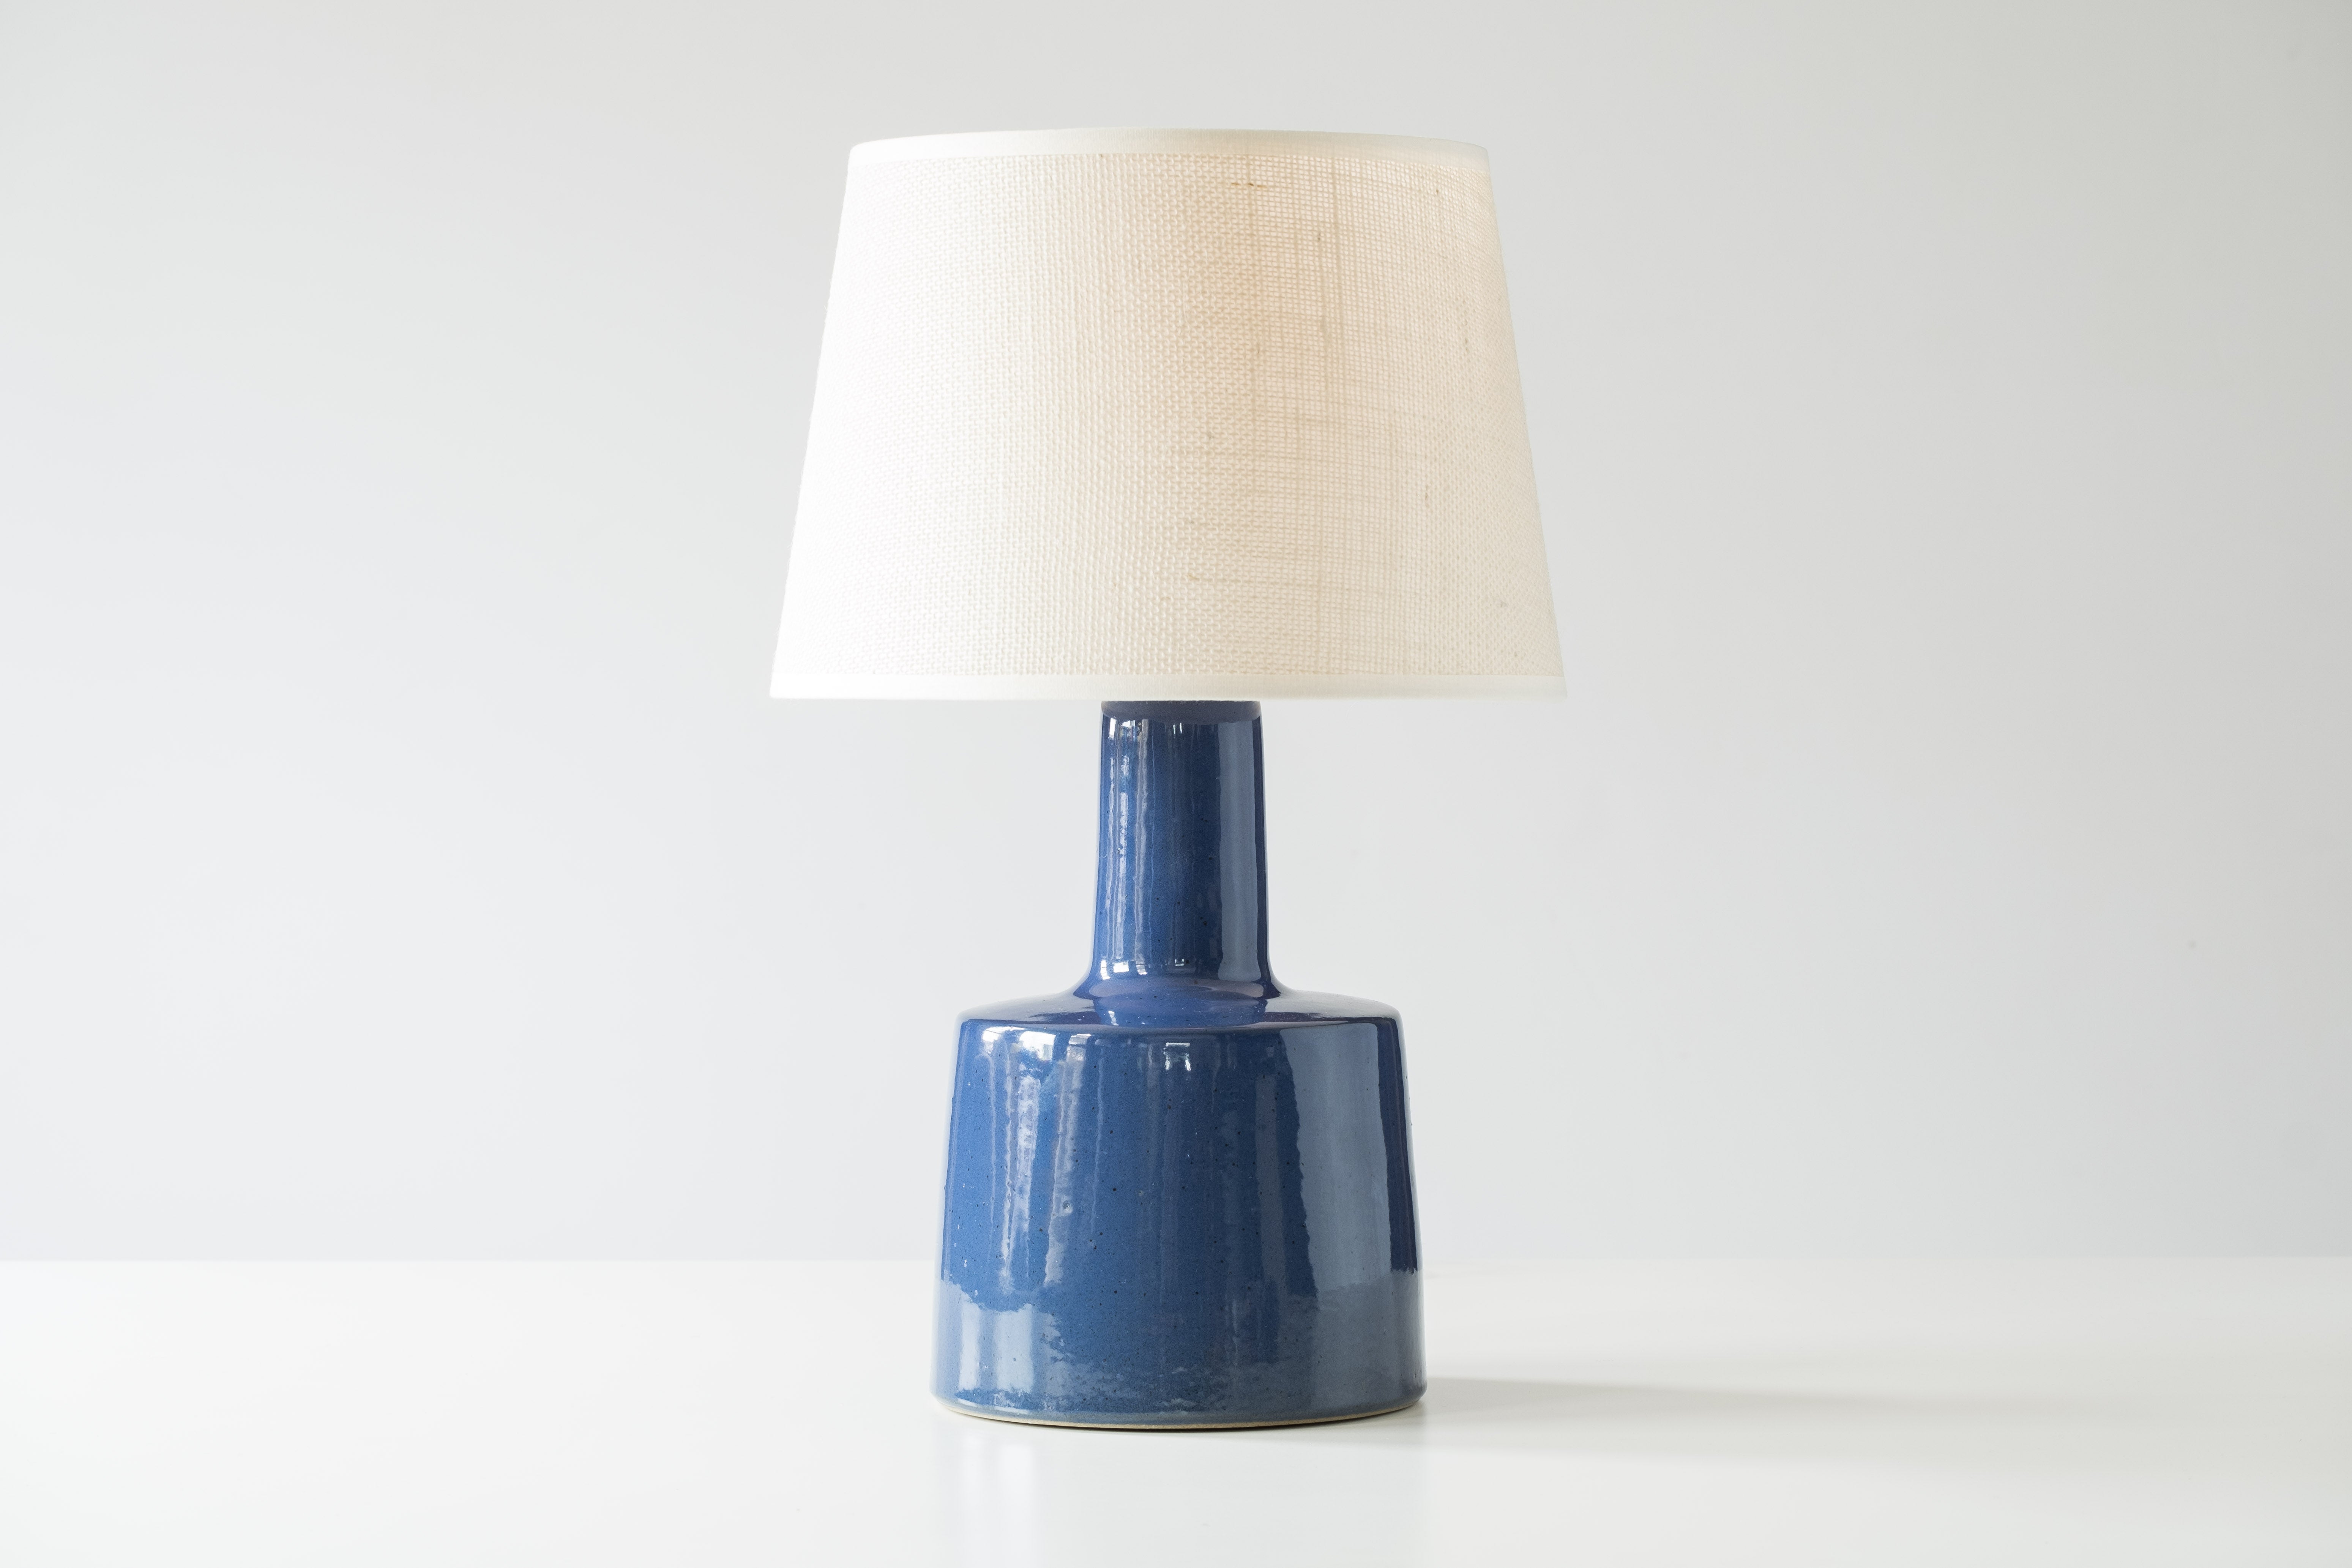 What is it?
—
Another gem from the masters of mid century lightning – Gordon and Jane Martz.

This signed Martz model 105 lamp comes in a glossy dark sapphire blue glaze with tiny flecks and specks of darker colors.

This is a beautiful piece that